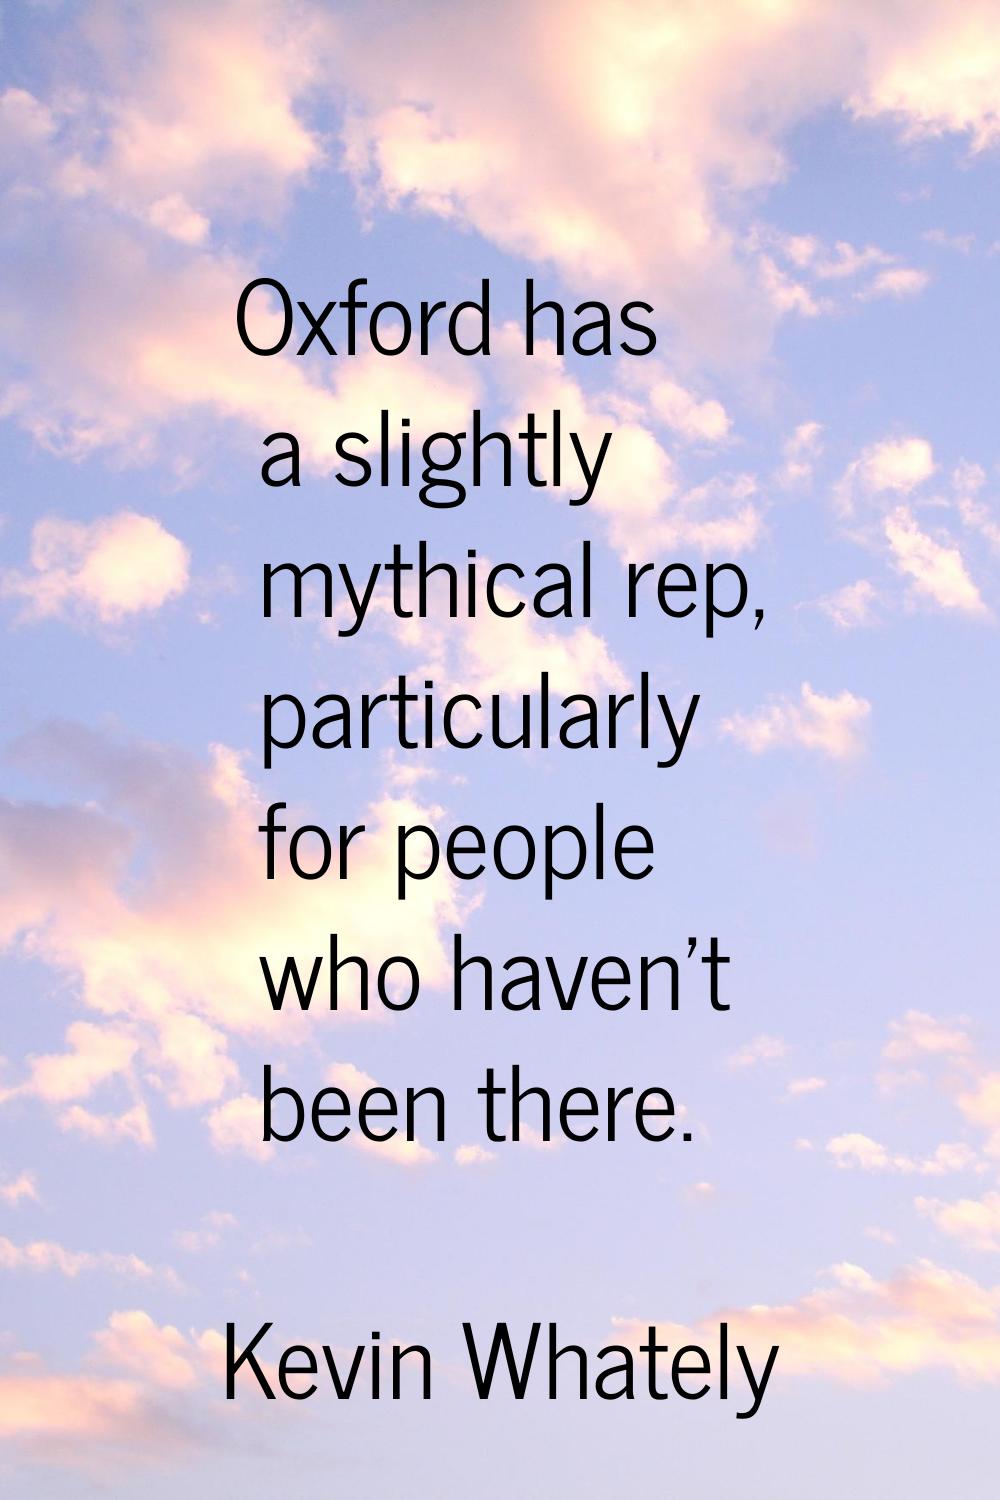 Oxford has a slightly mythical rep, particularly for people who haven't been there.